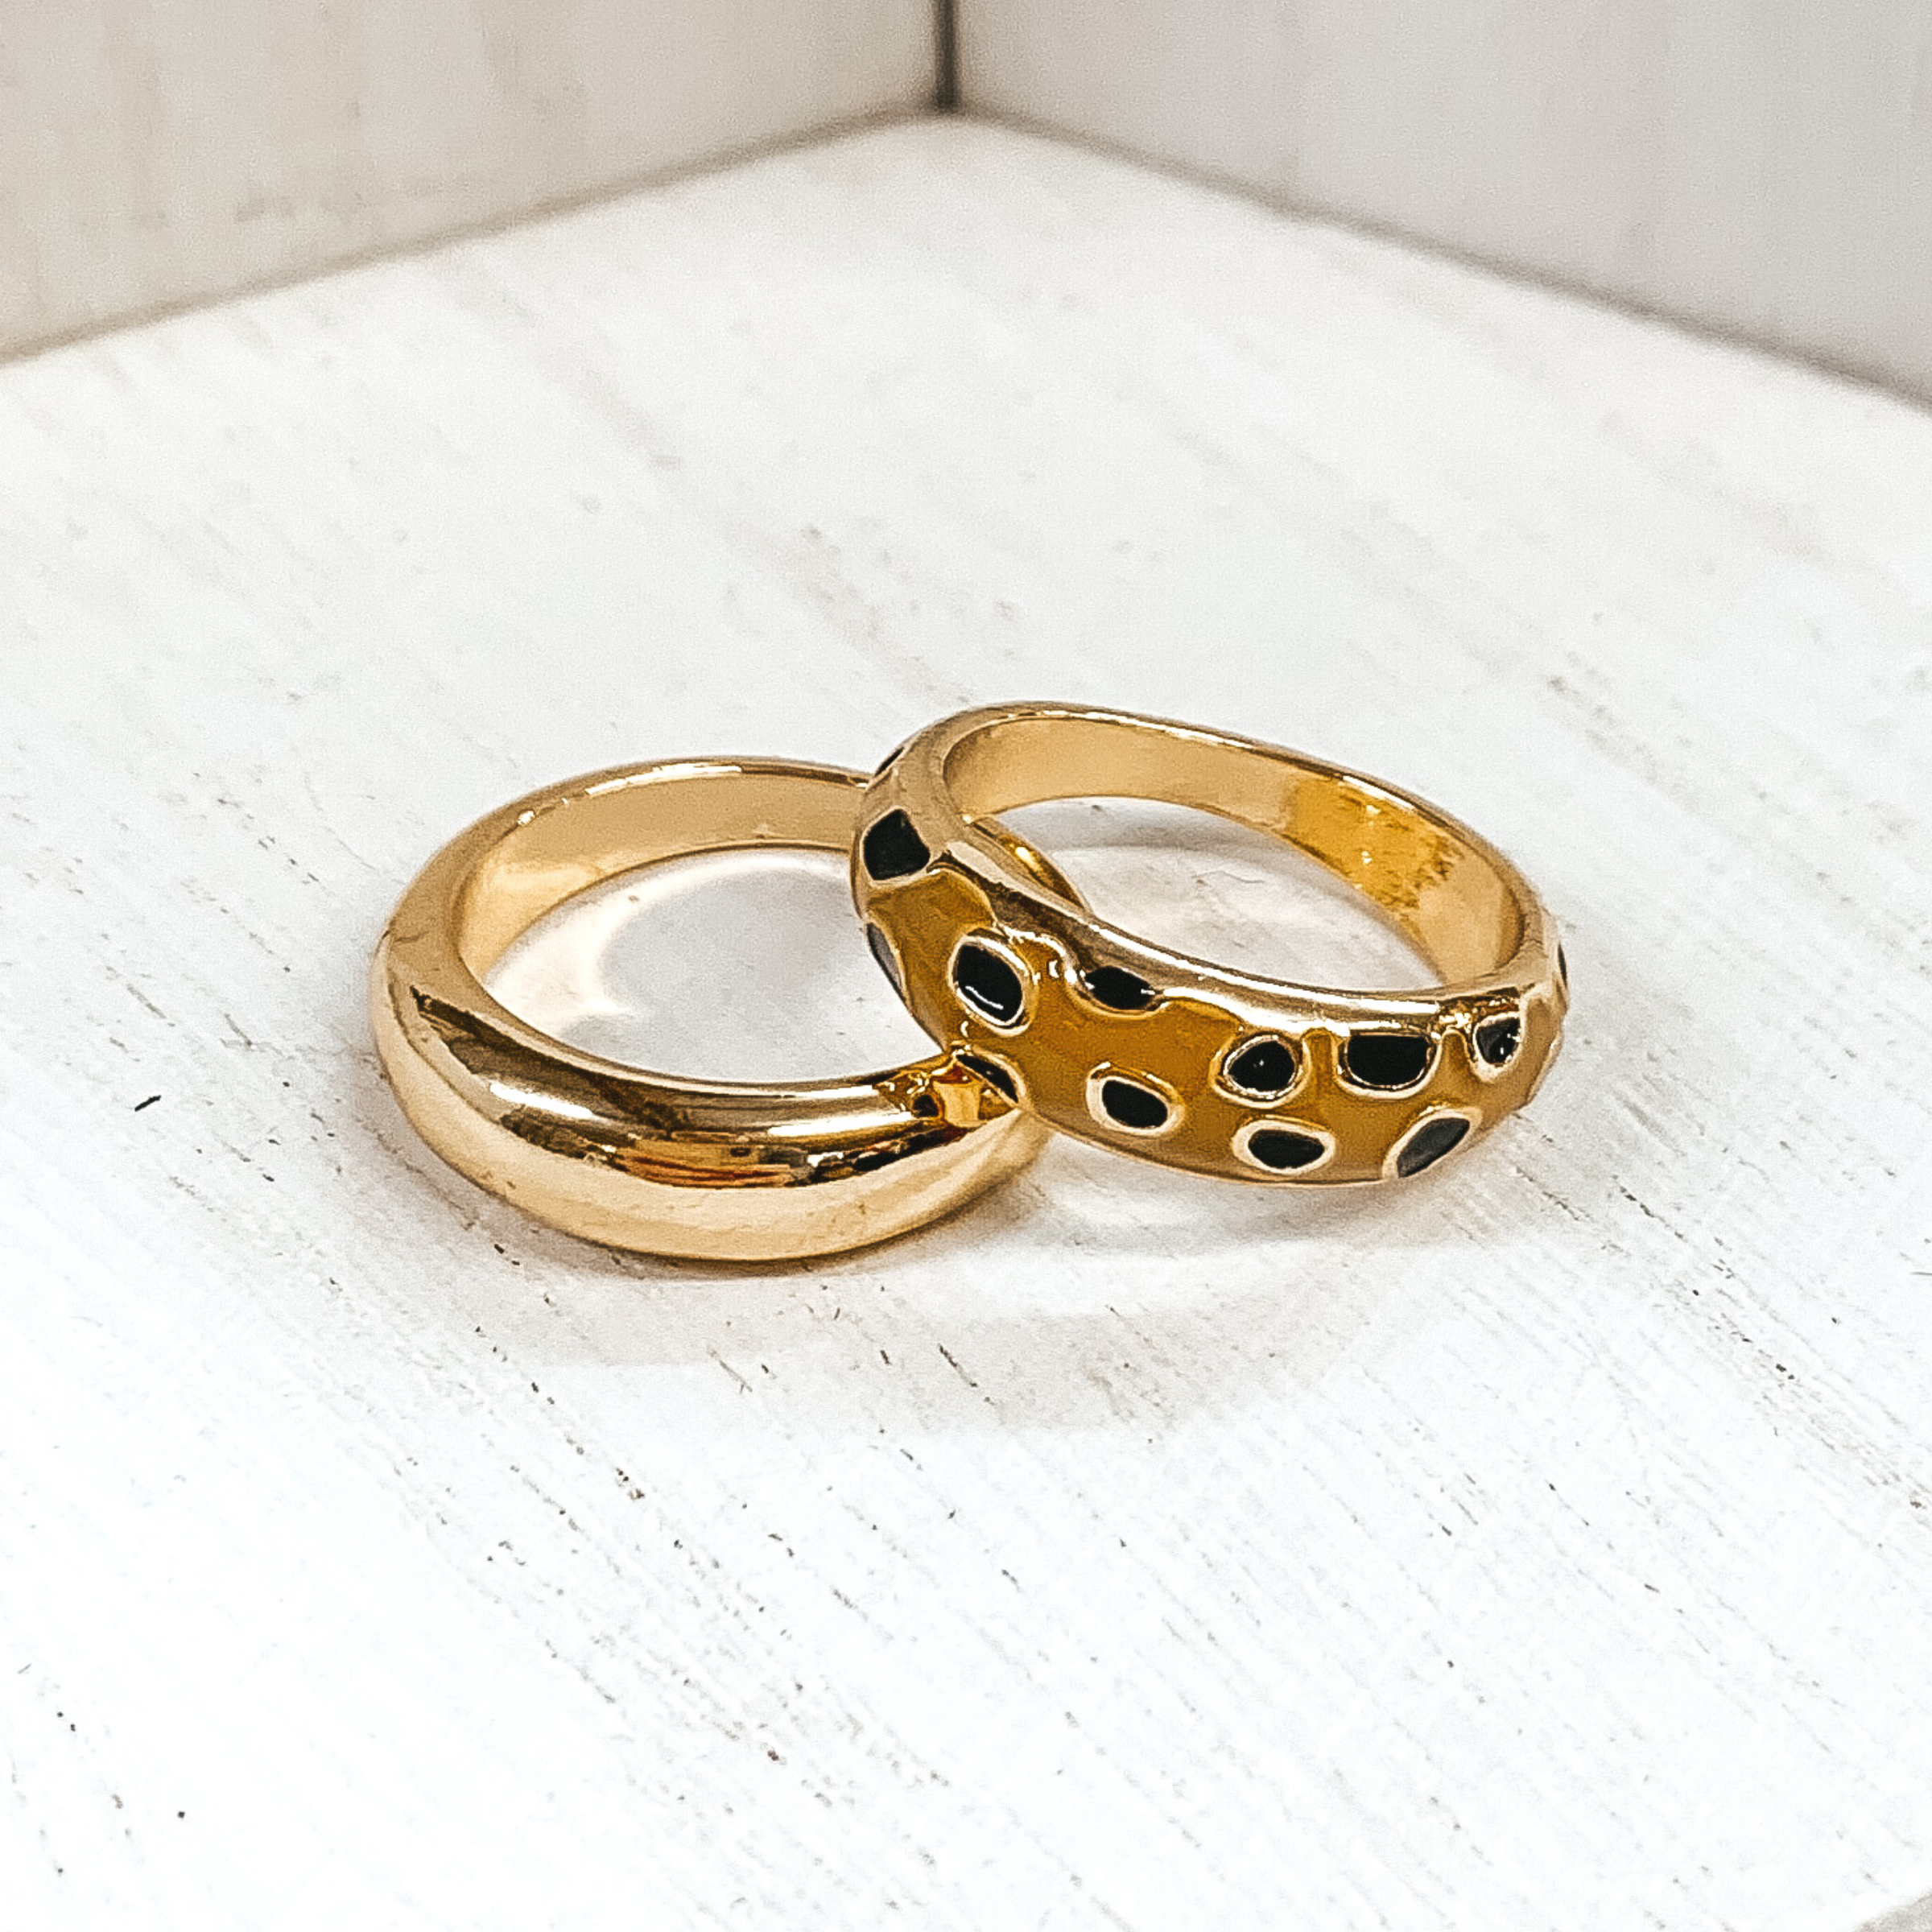 Set of two thick, gold rings. One ring is plain, while the secong ring has a tan colored part with black cheetah print. These rings are pictured on a white background. 